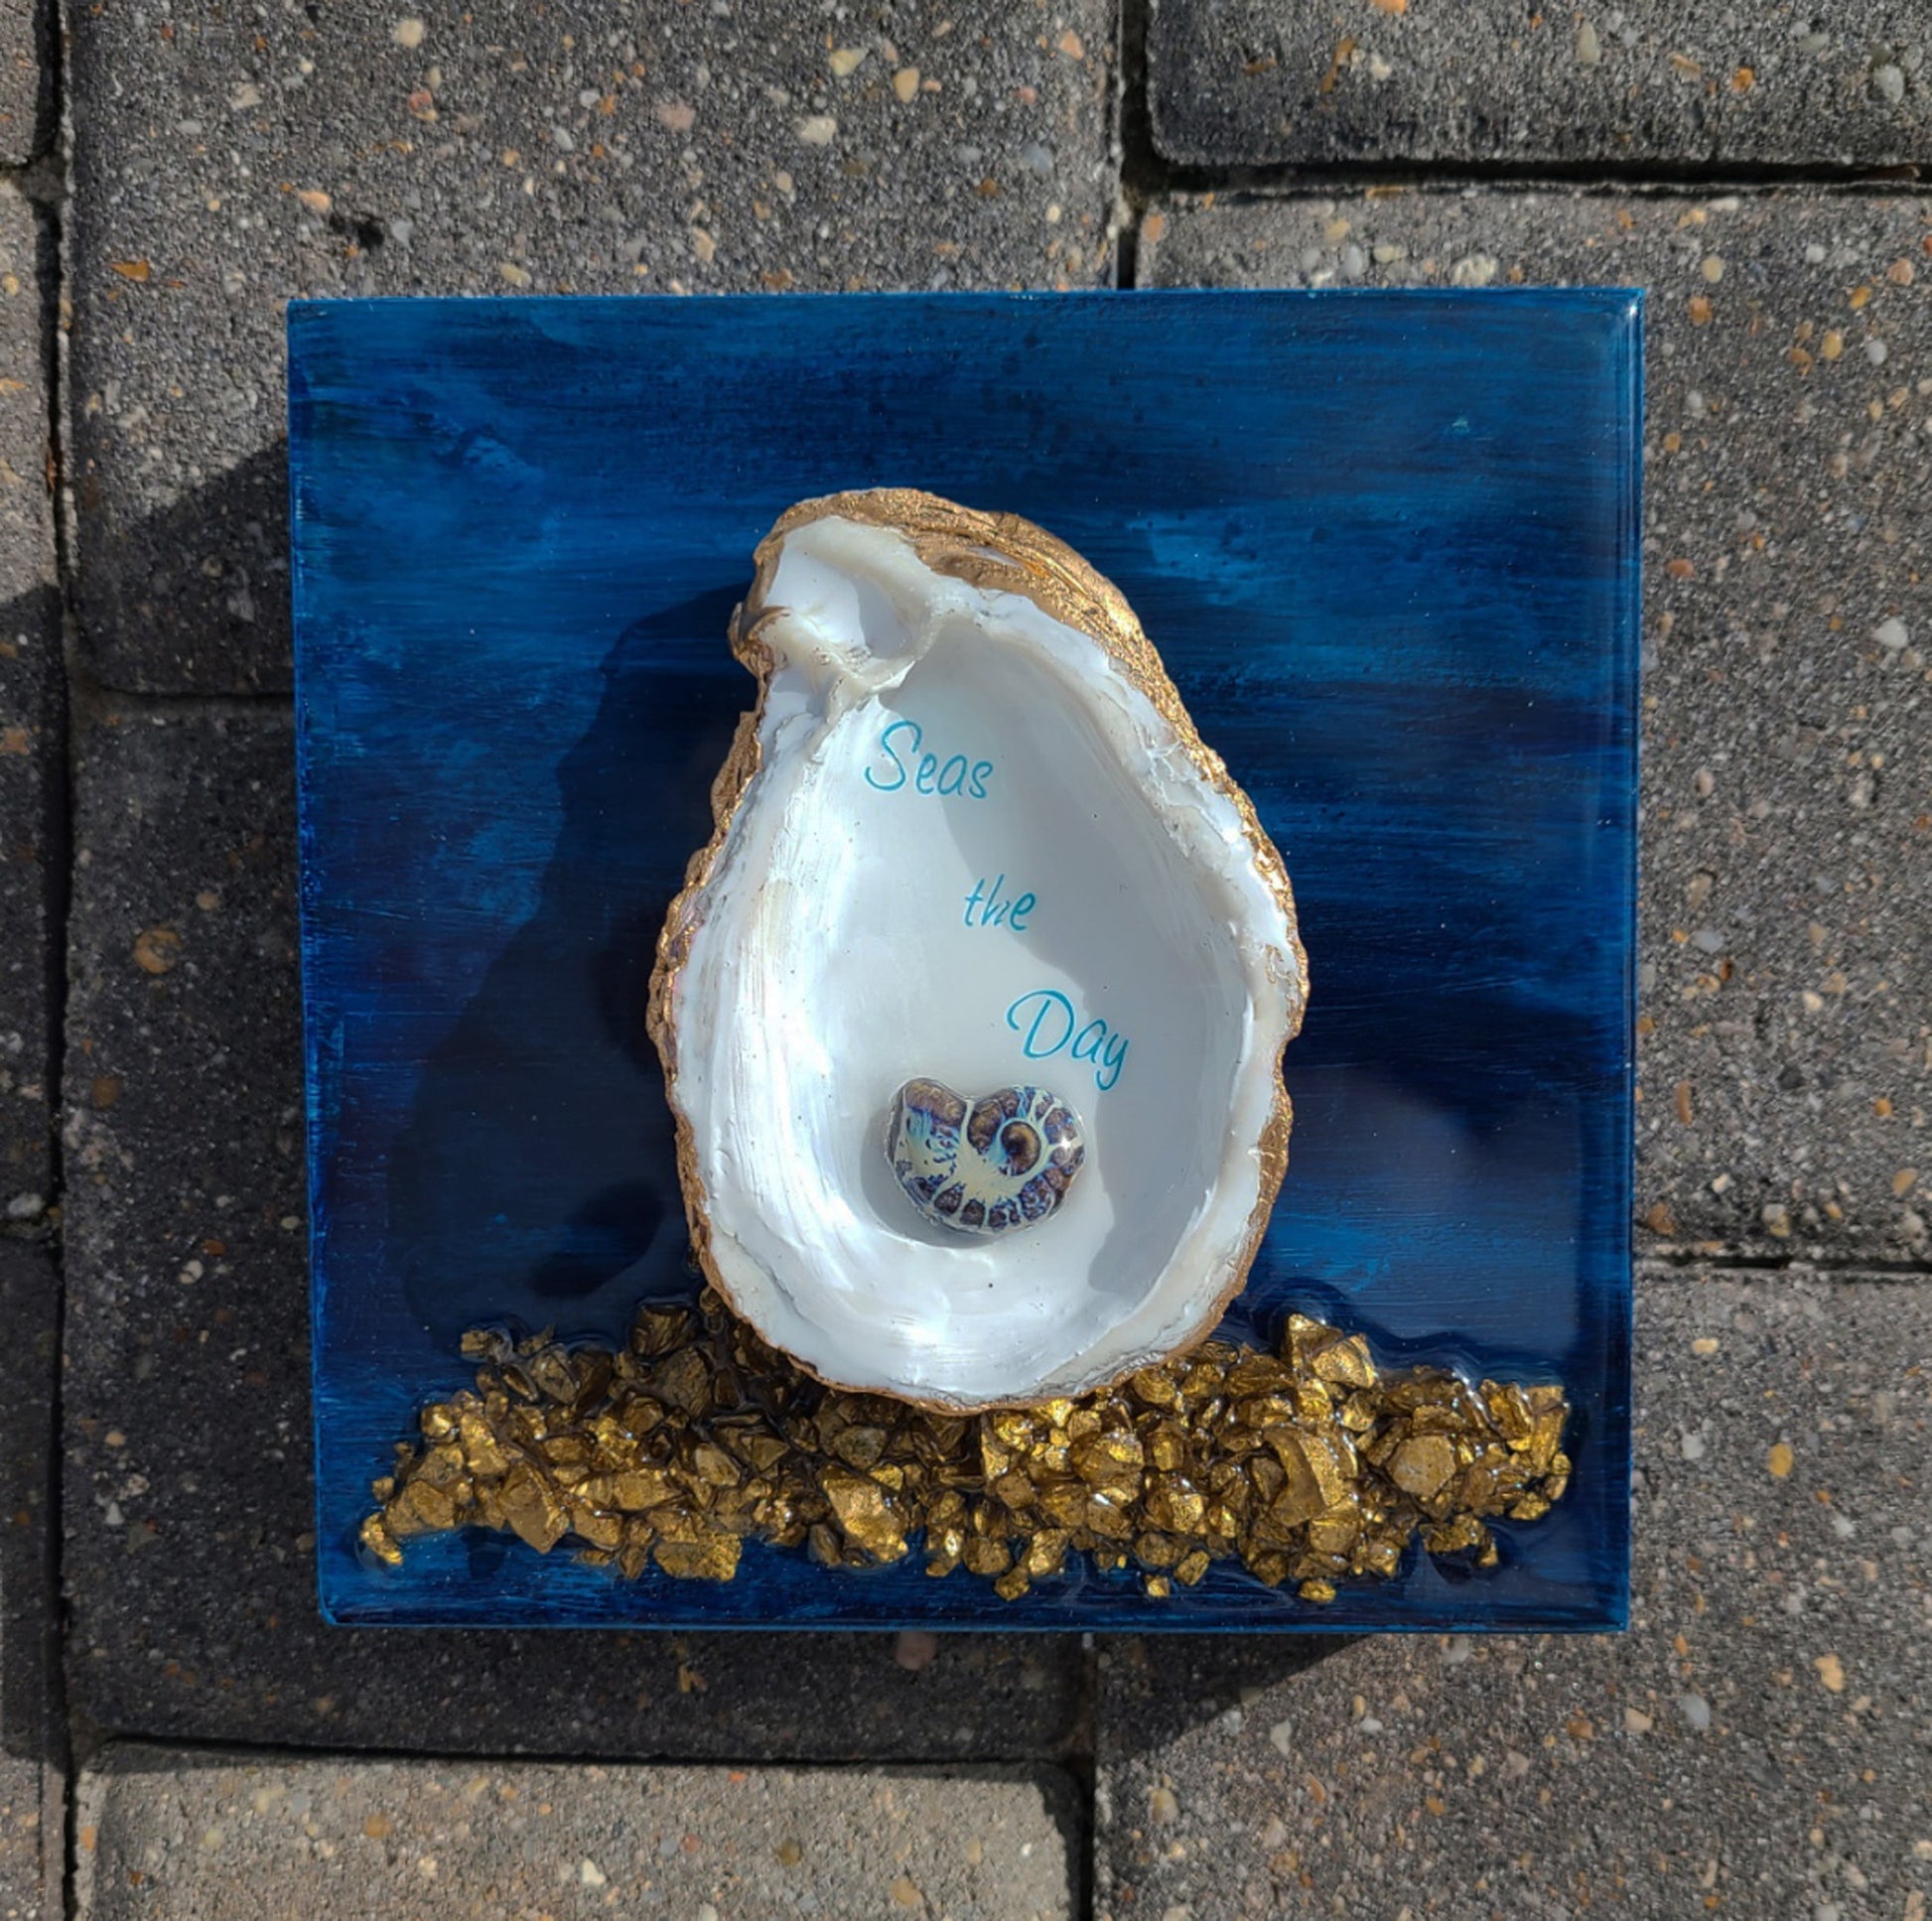 Always Seas The Day!  3-D Wall Art.  Real Oyster Shell is trimmed in gold, features a small nautilus bead and gold-colored rocks.  The background looks like a stormy deep sea.  Unique, One-of-a-kind piece of art.  The whole piece is sealed with UV Resistant Resin.  Approximate size: 6 x 6 x 1.5 inches